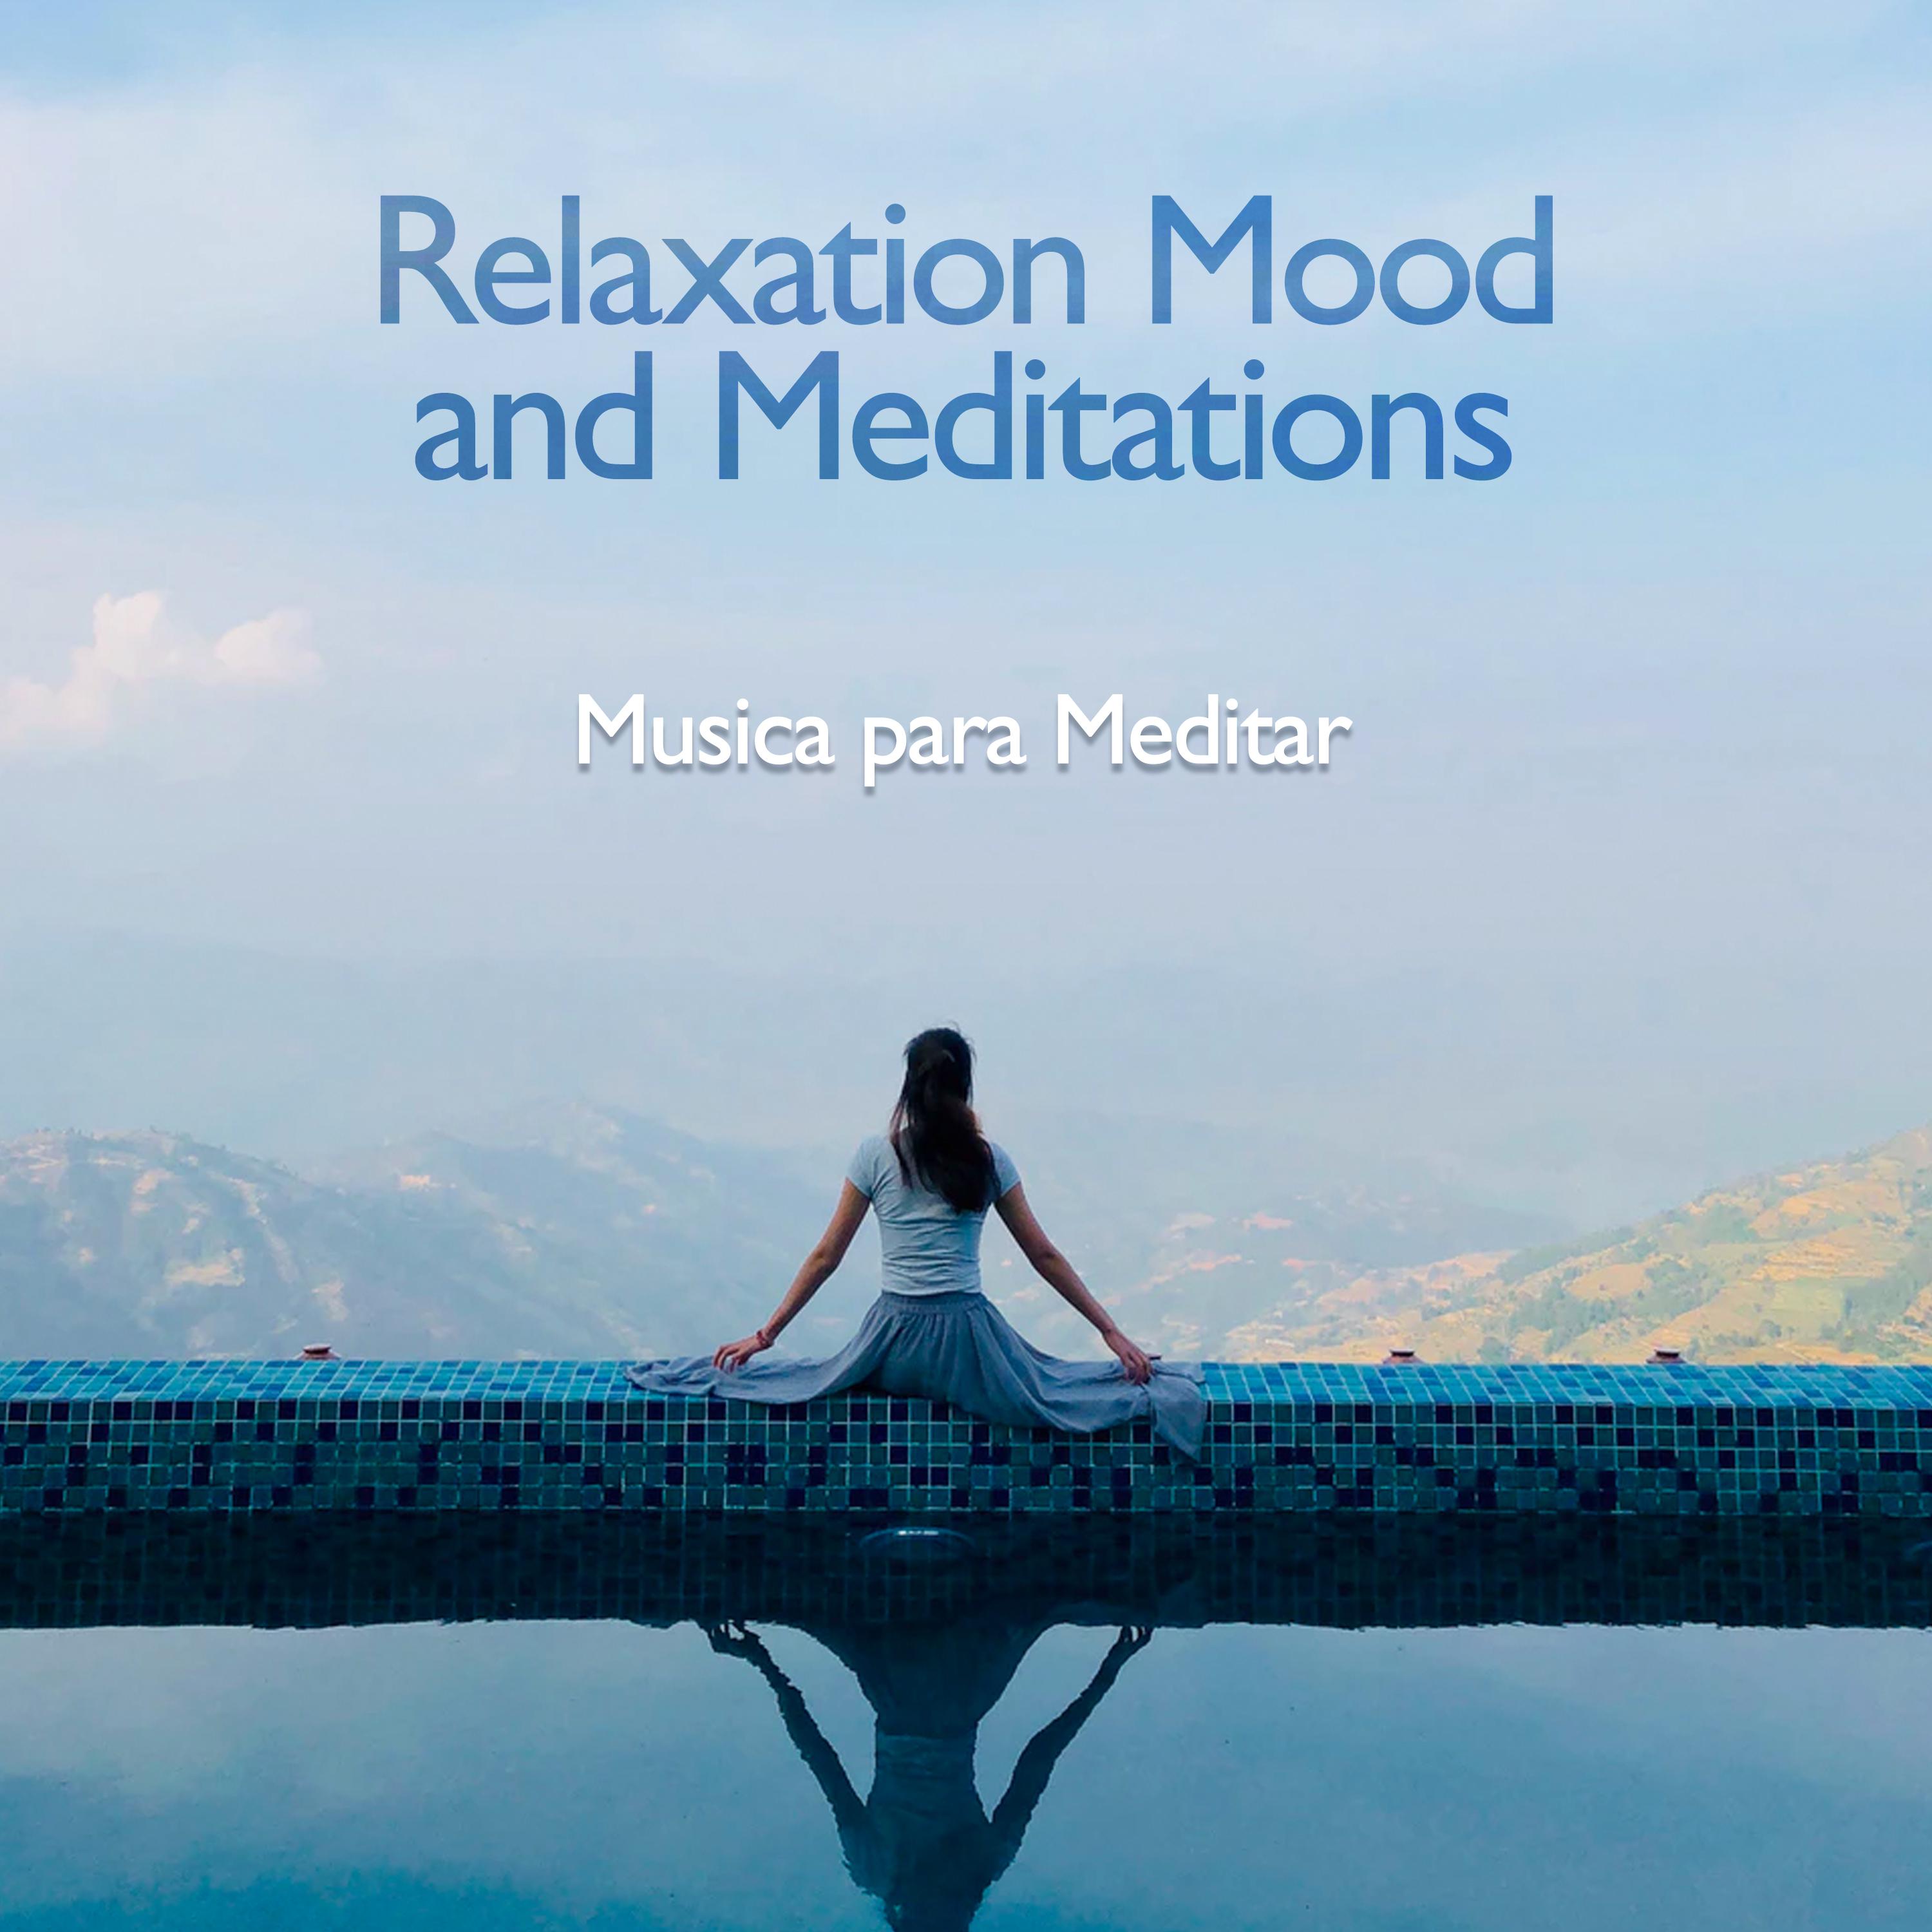 Relaxation Mood and Meditations